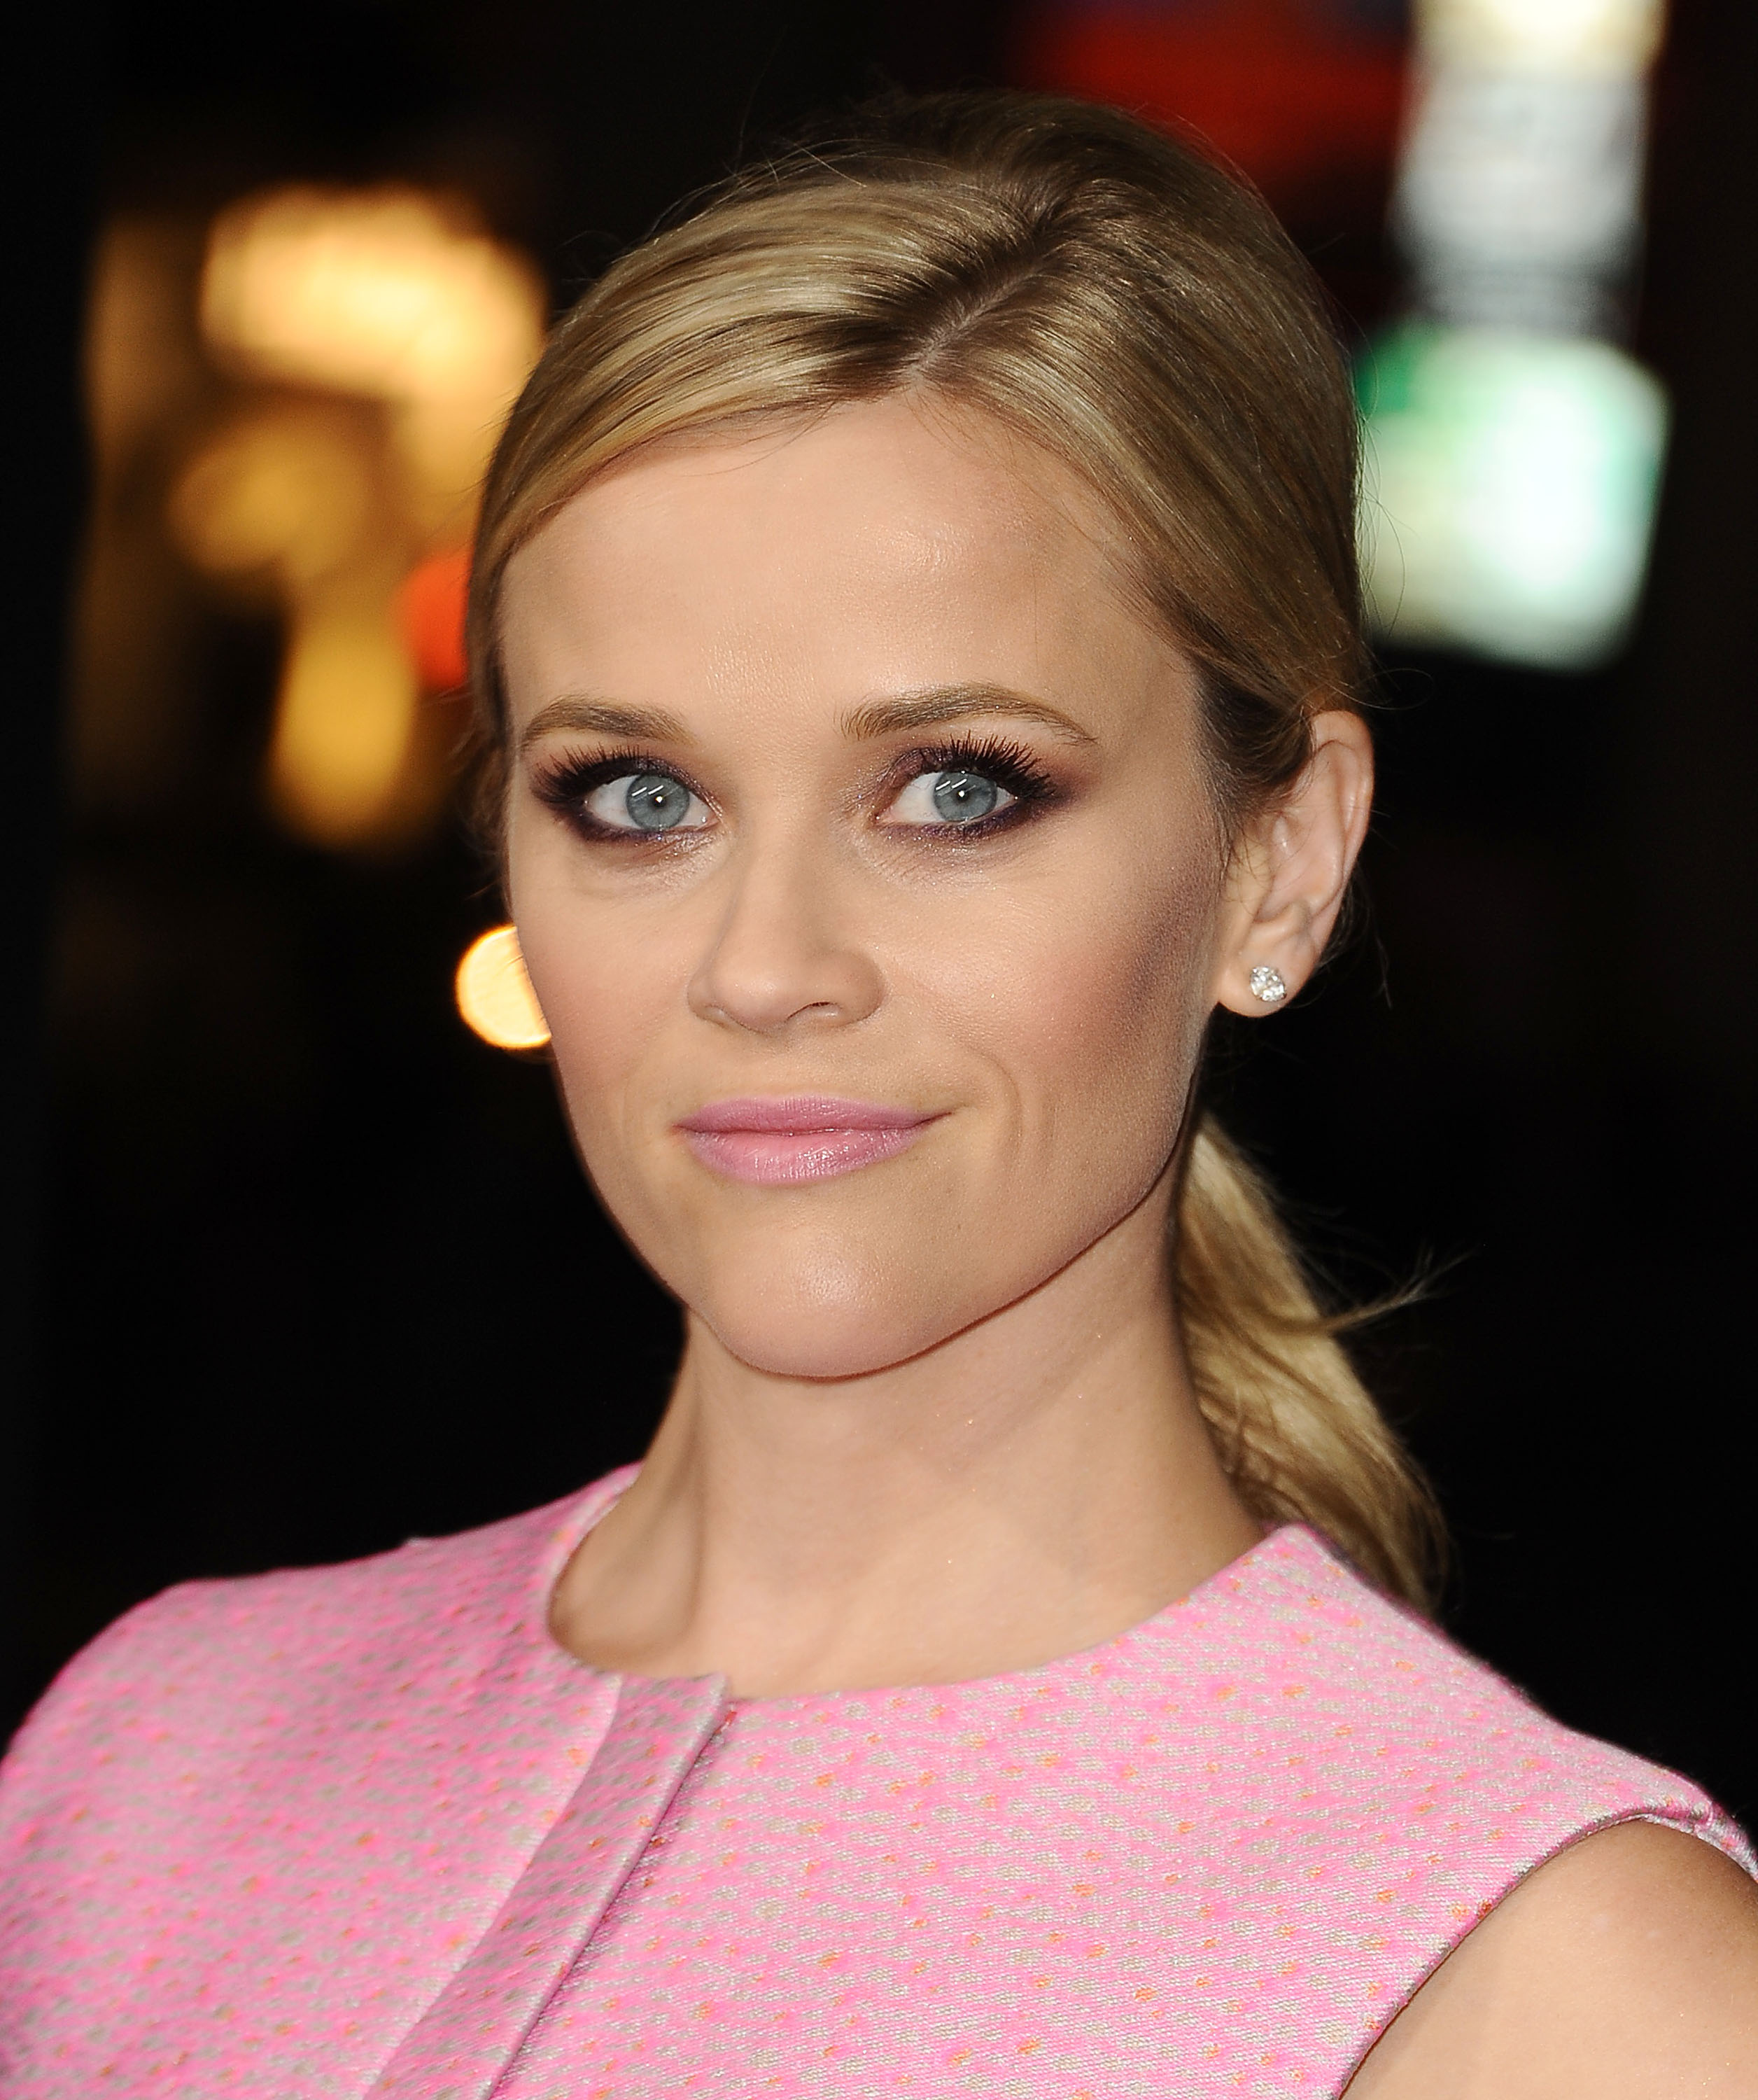 Reese Witherspoon attends the premiere of "Inherent Vice" on Dec. 10, 2014 in Hollywood, California. (Jason LaVeris—Getty Images/FilmMagic)